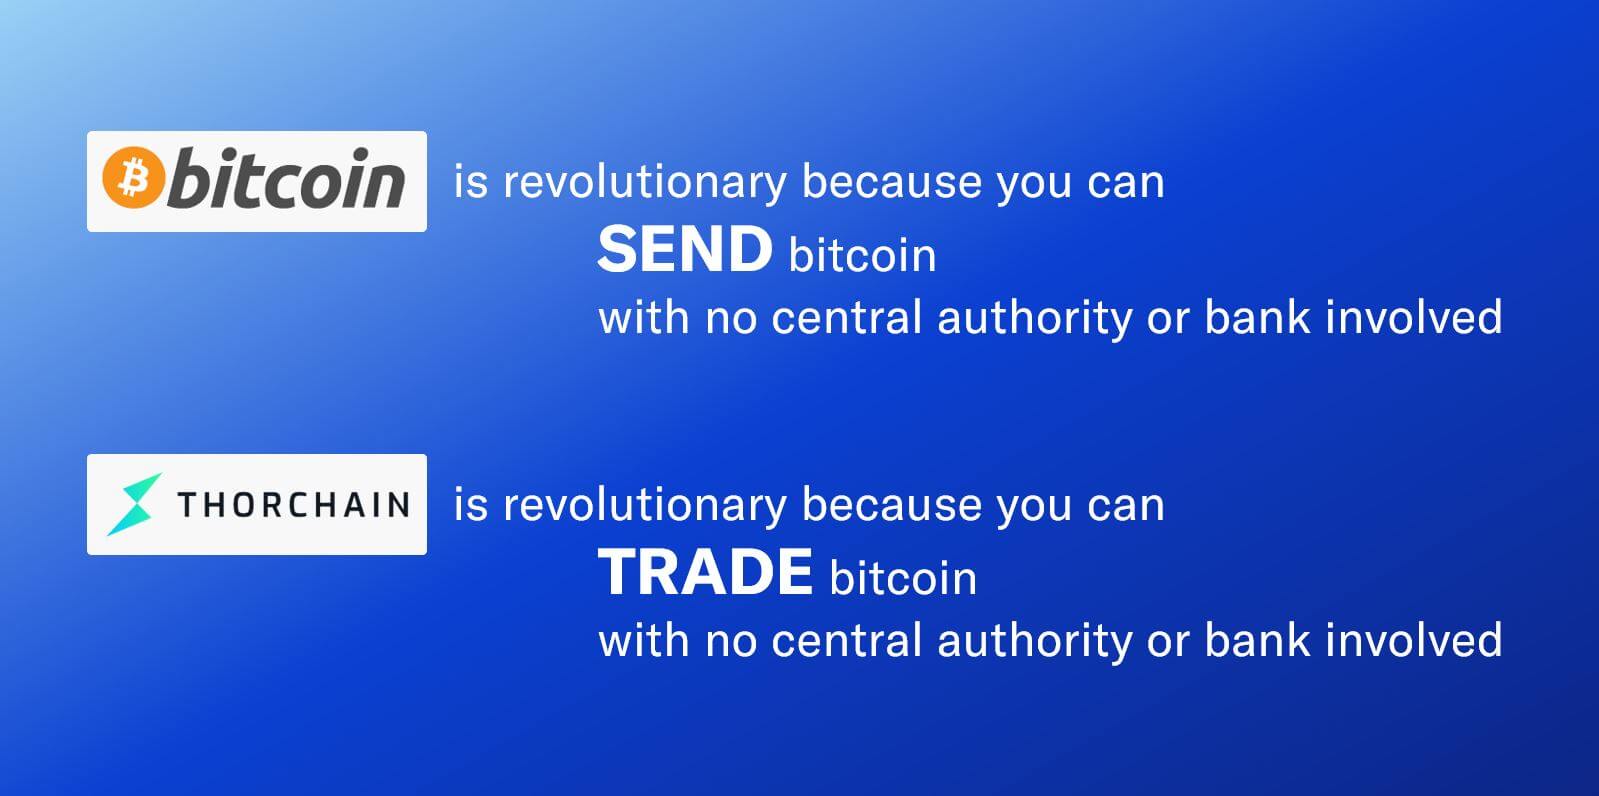 Bitcoin is revolutionary because you can send without third party. THORChain is revolutionary because you can swap without third party.